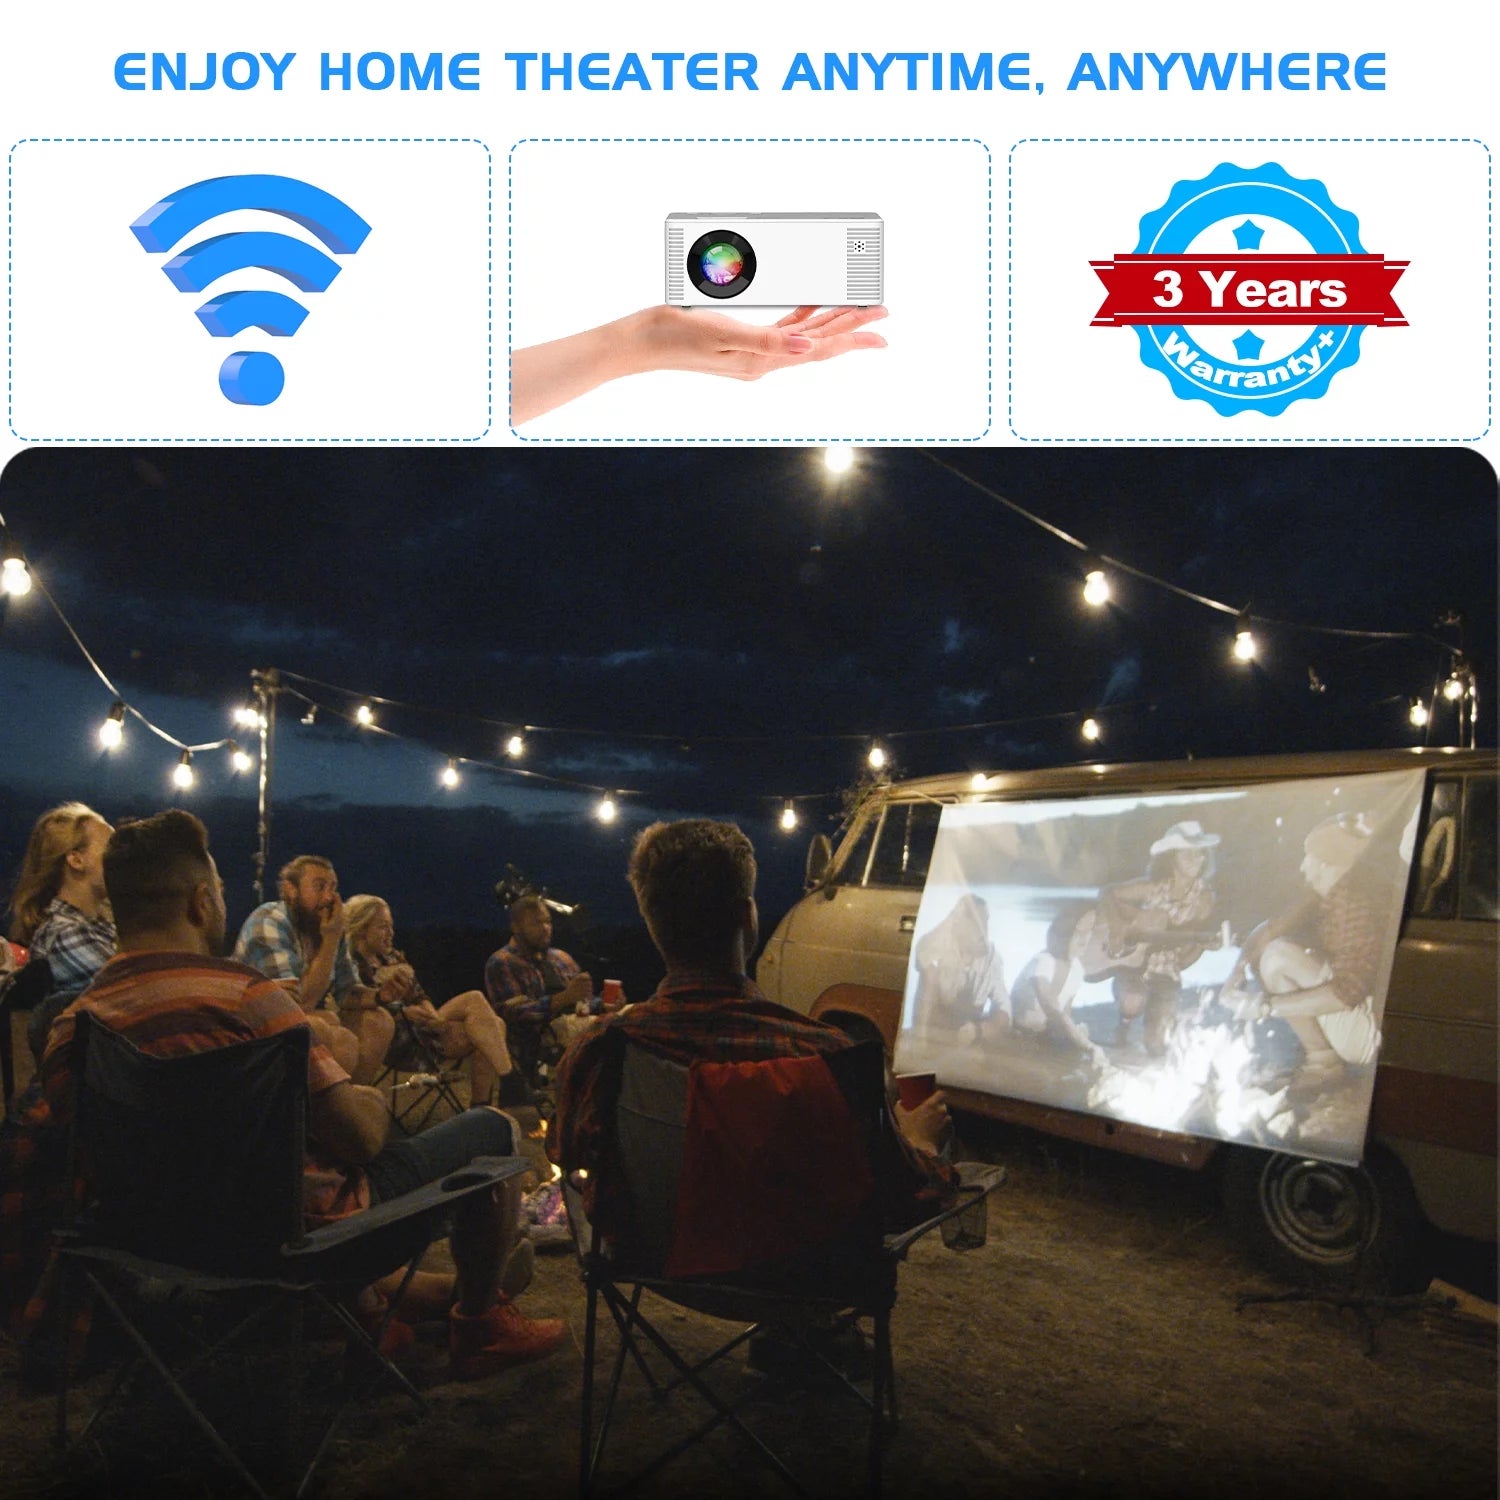 Projector with Wifi, Mini Projector for Outdoor, Movie Projector Support 1080P for Home Theater with HDMI